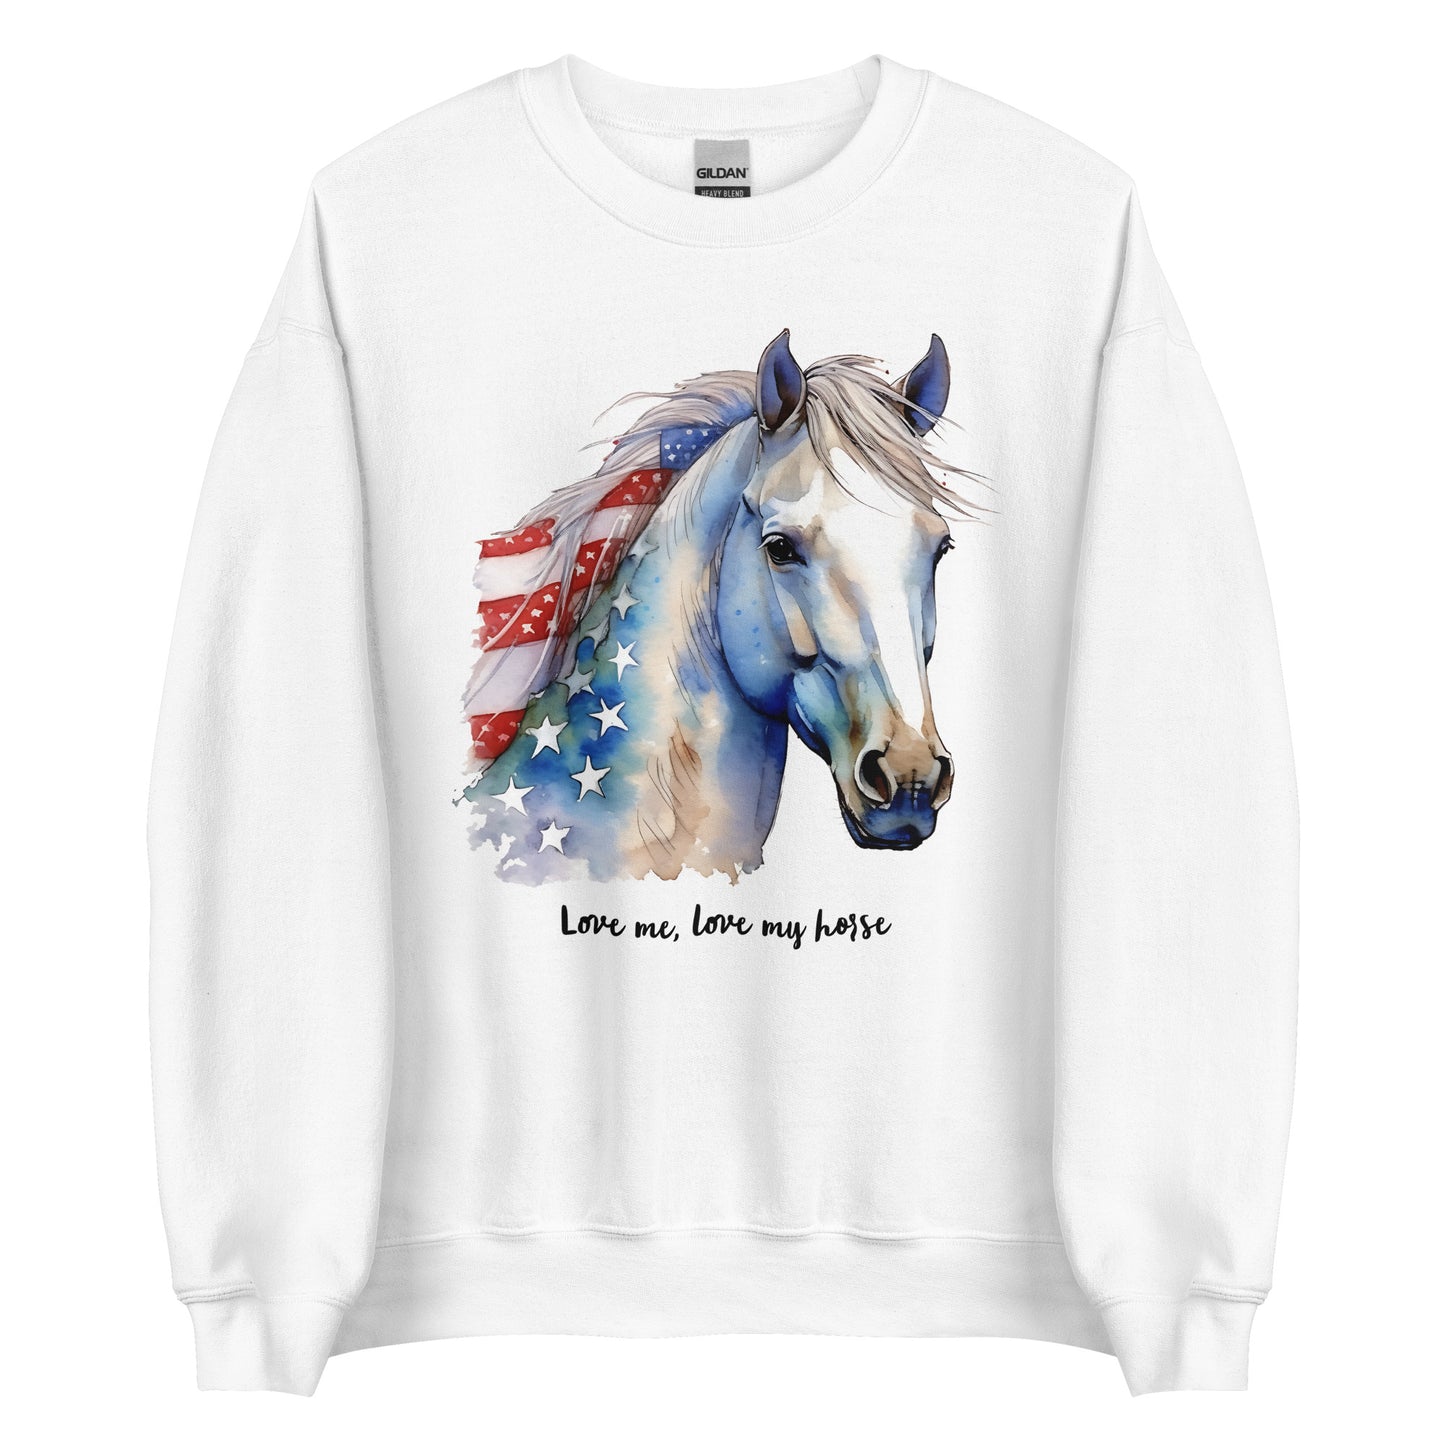 USA Colored Patriotic Sweatshirt With Blue Horse Graphic Design For Horse Lovers